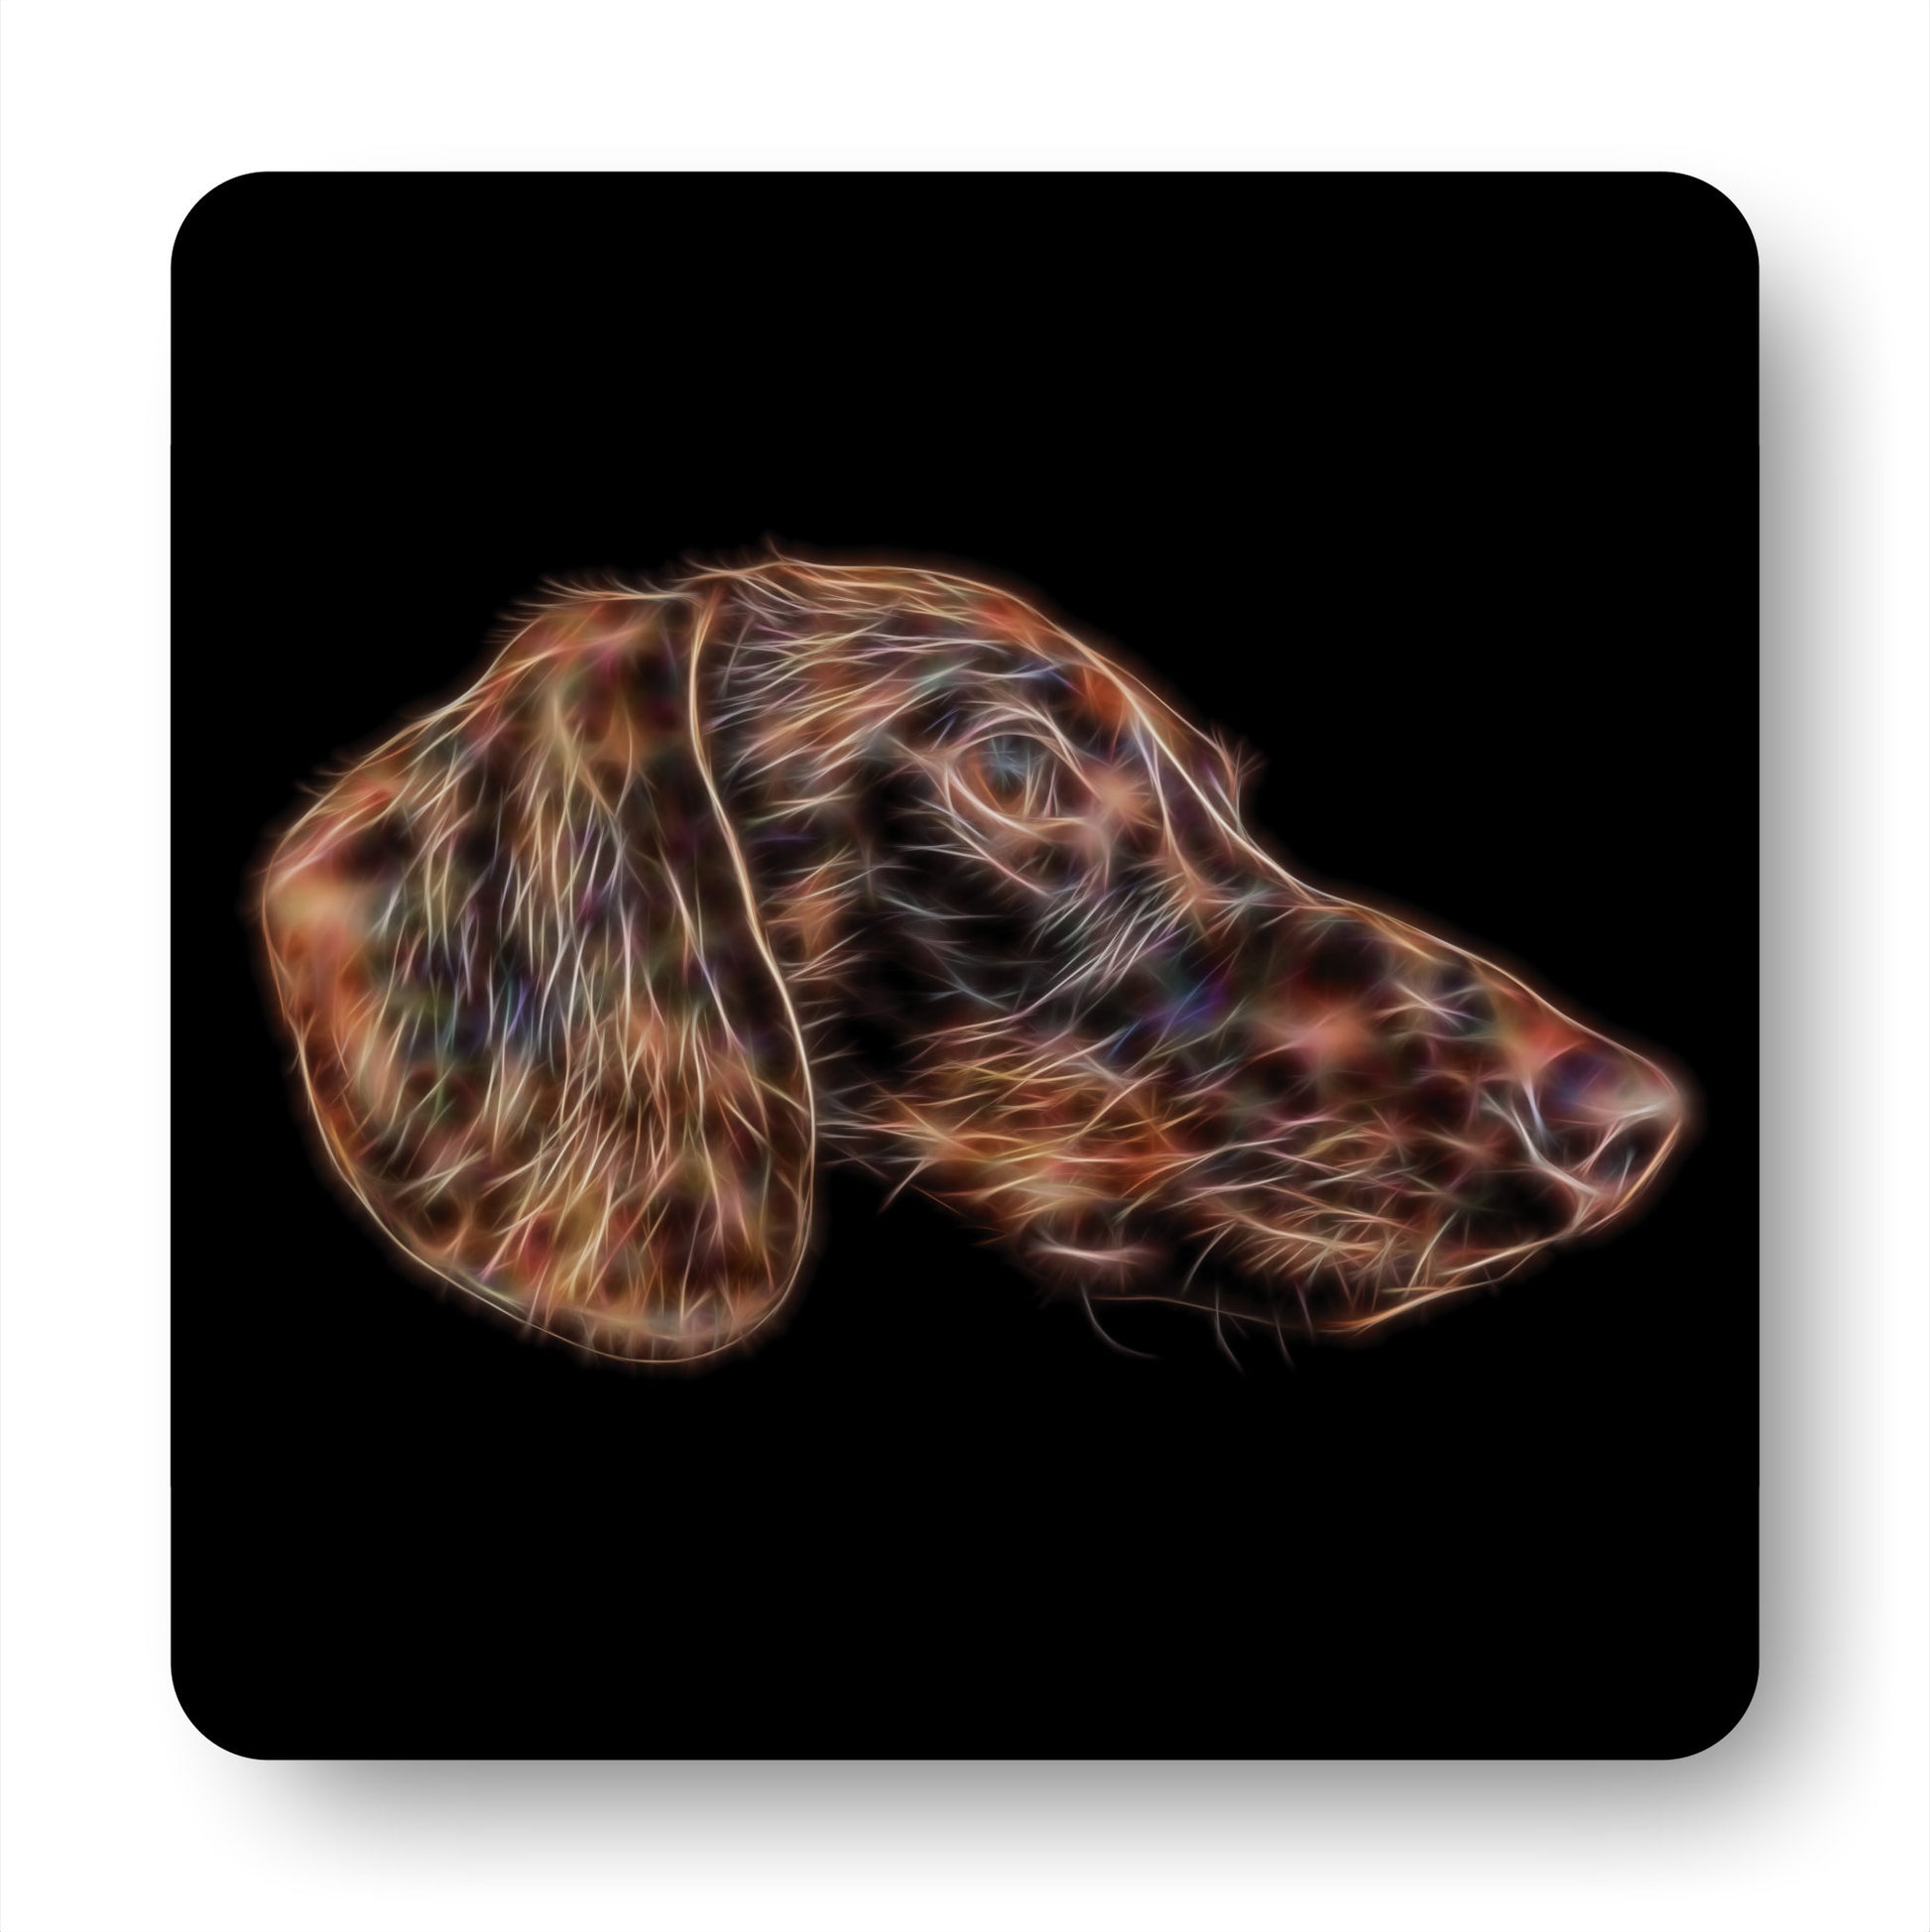 Chocolate Brown Dachshund Coasters, Set of 4, with Stunning Fractal Art Design